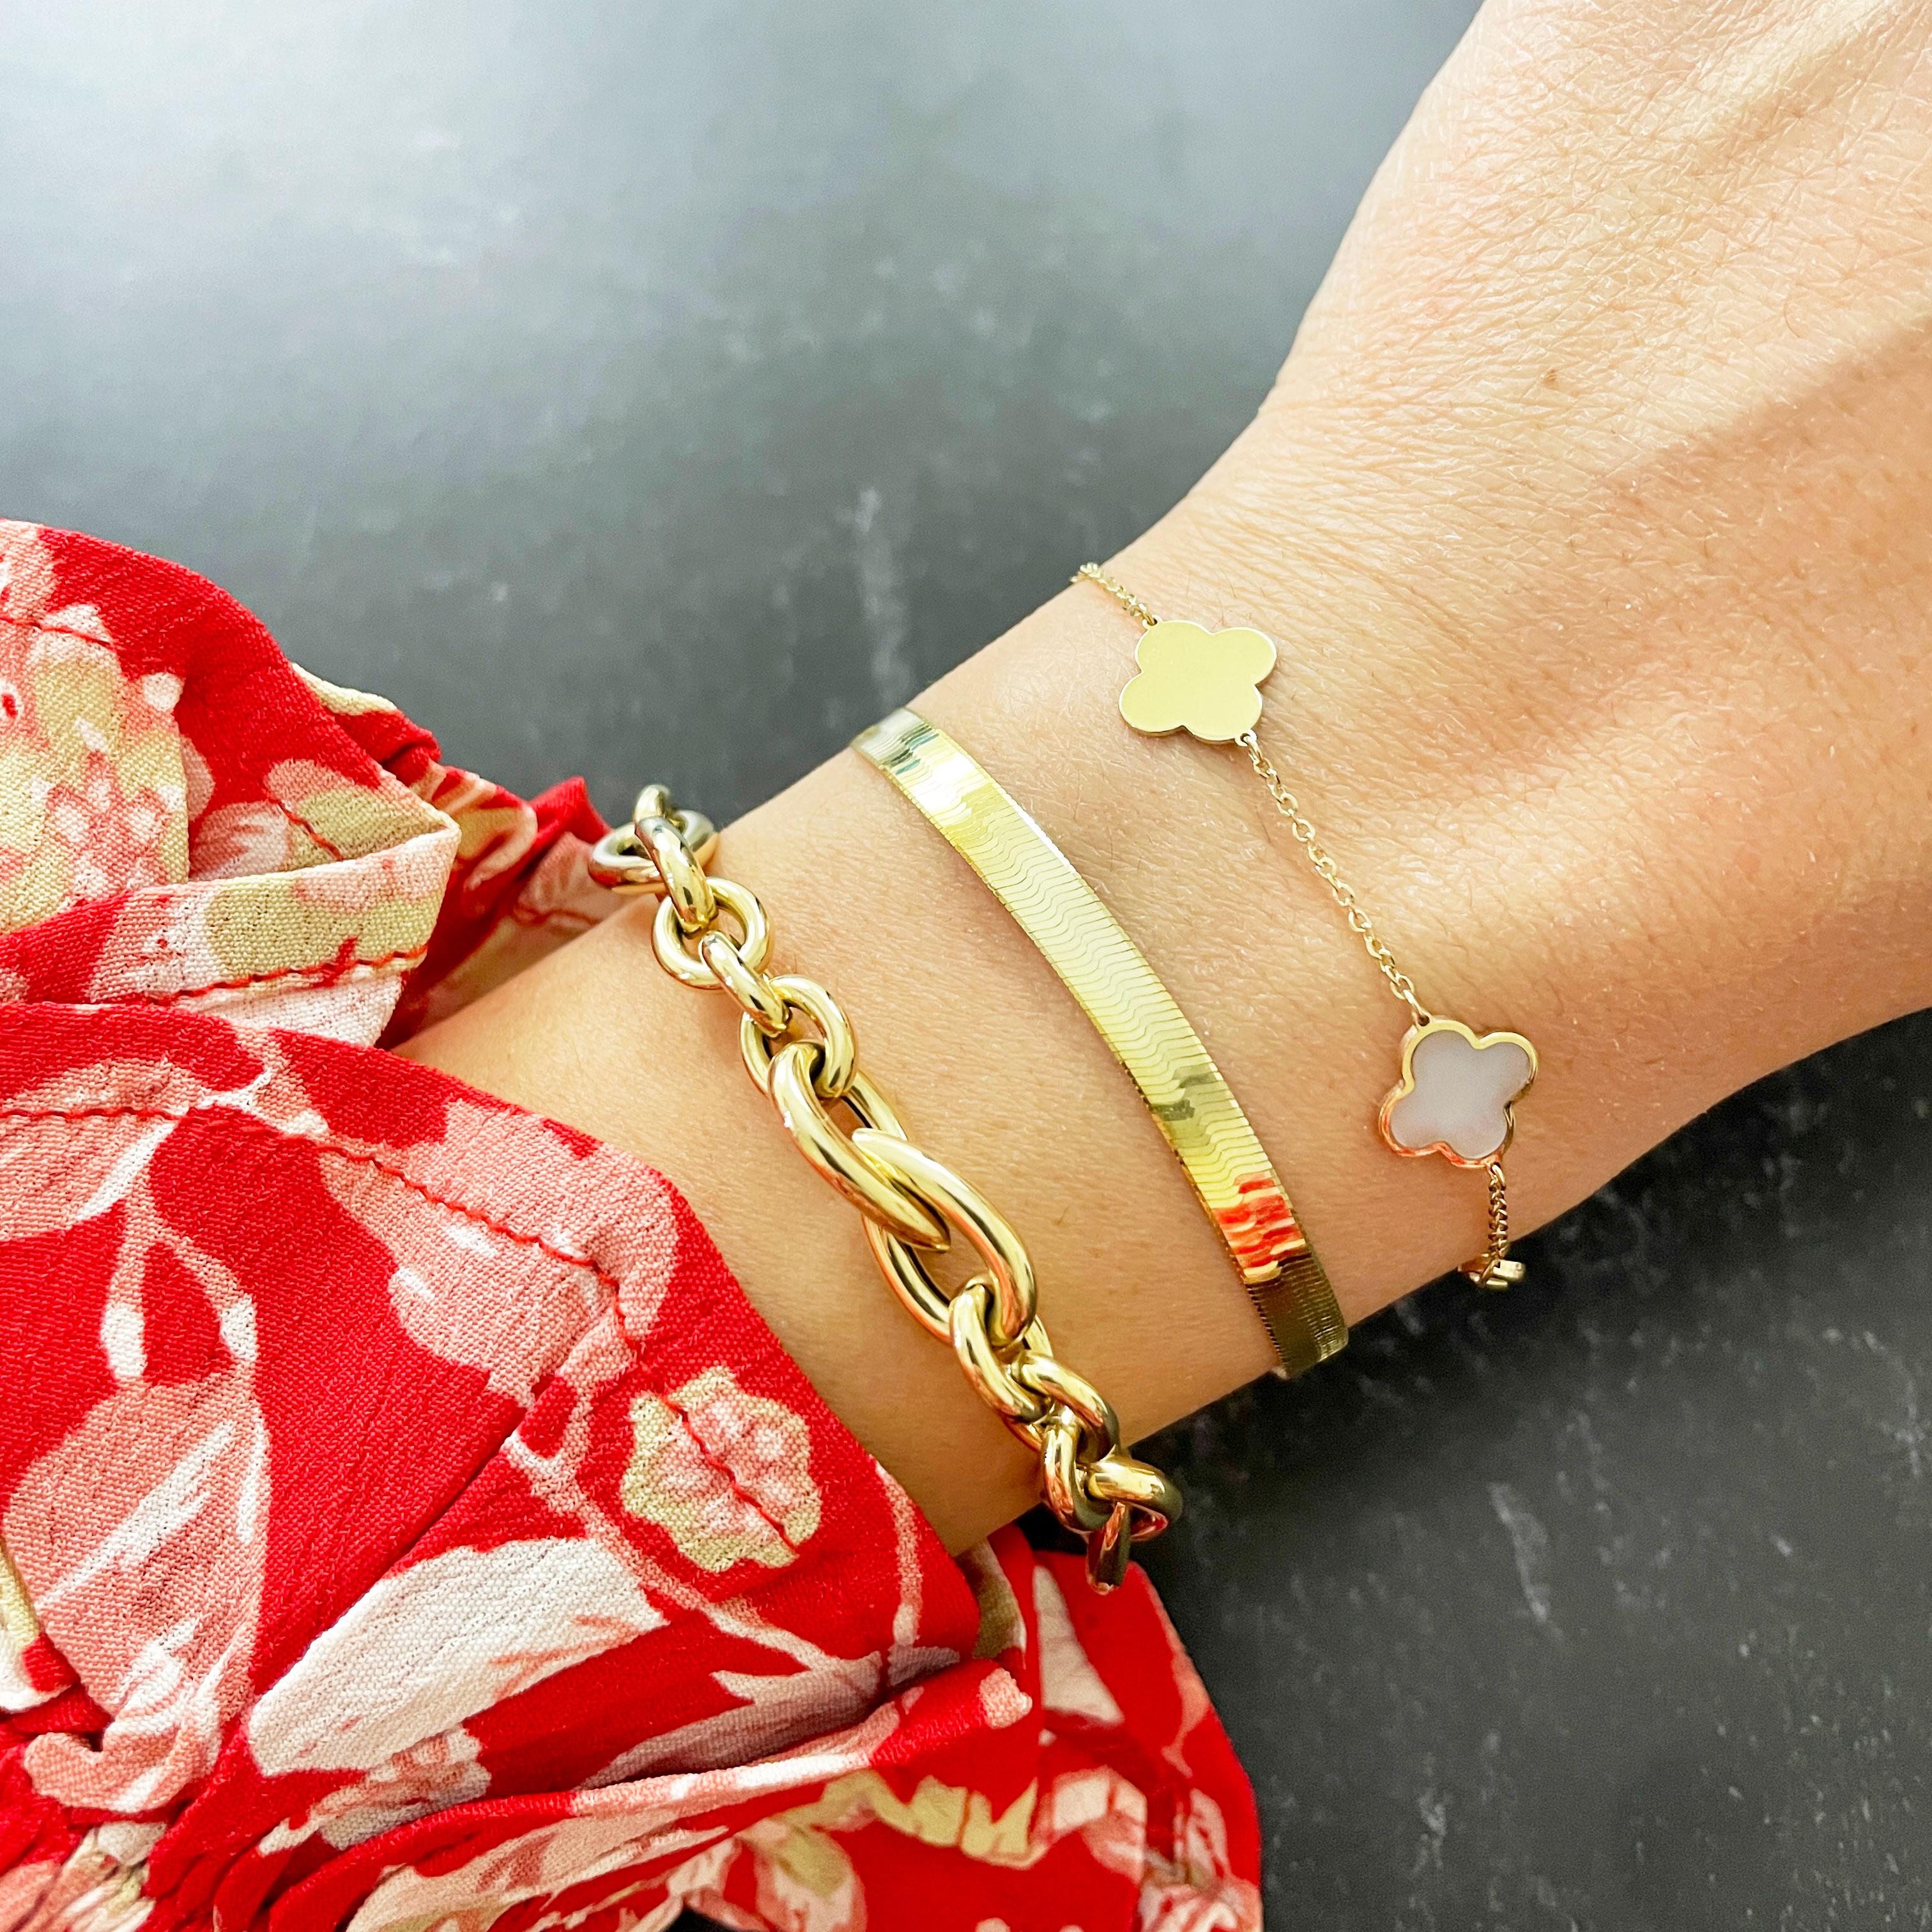 The 14k gold large herringbone bracelet is the perfect addition to bring together any outfit. Be sure to stack it for an elevated look!

14K Yellow Gold

Chain Length: 7 inches
Measures: 5 millimeters
Rectangle Lobster Clasp

Please note that